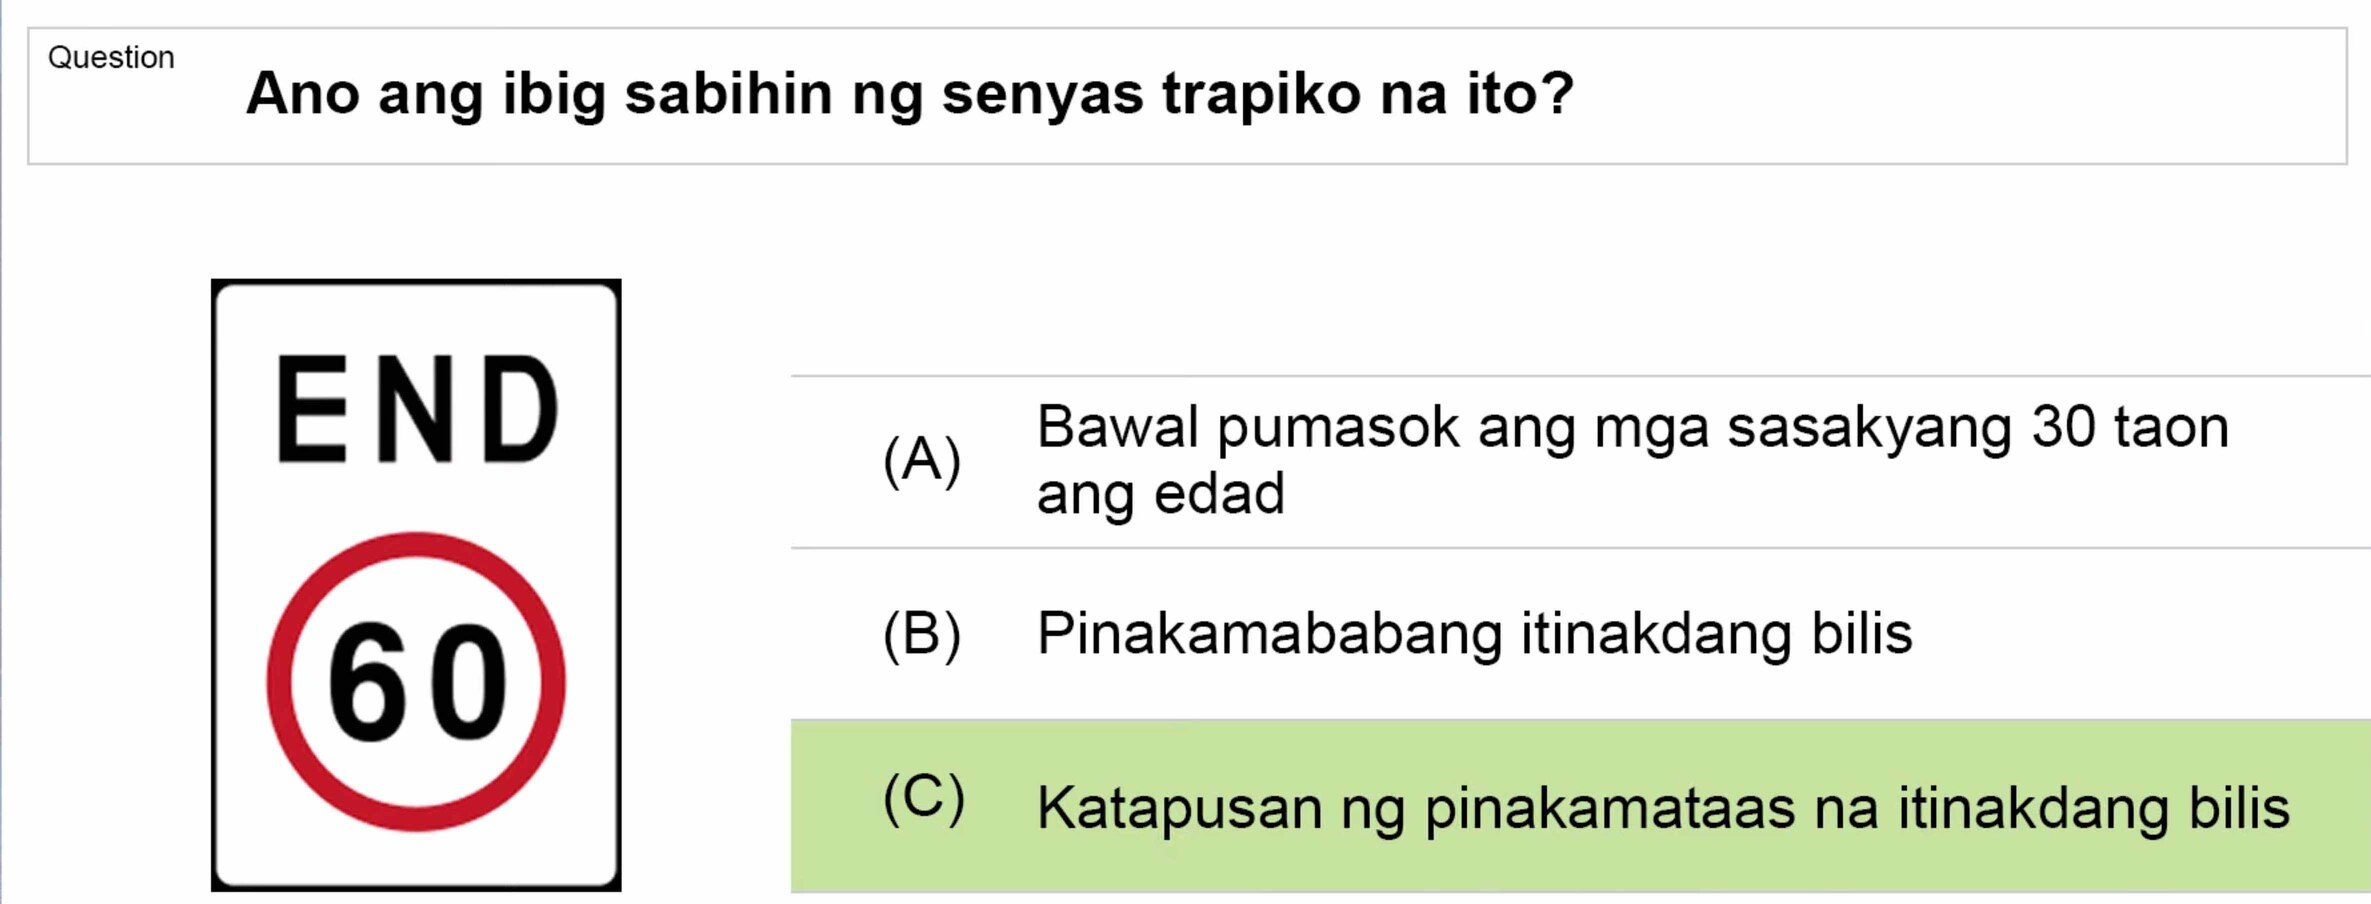 LTO Tagalog non professional exam reviewer motorcycle 1 (9)